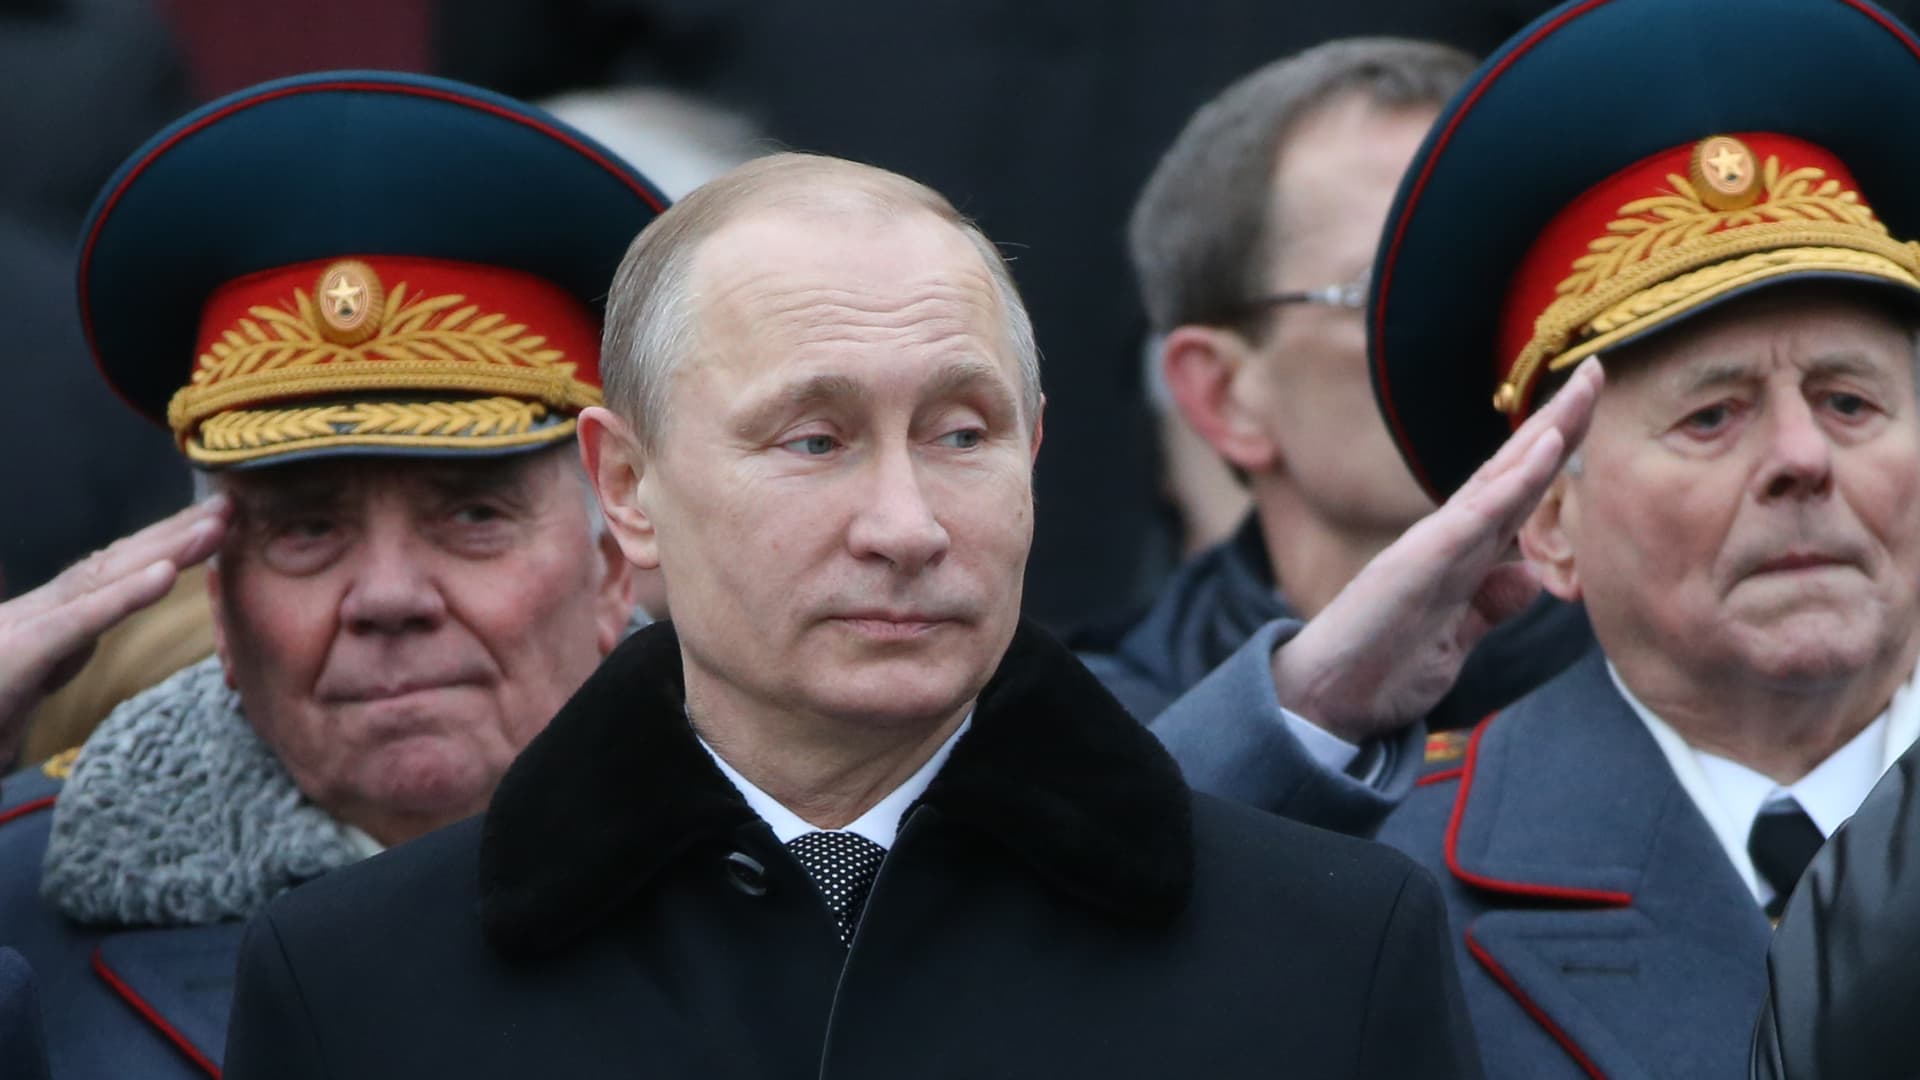 Russian President Vladimir Putin marks the Defender of the Fatheland Day in 2015 in central Moscow, Russia, with military officials surrounding him.